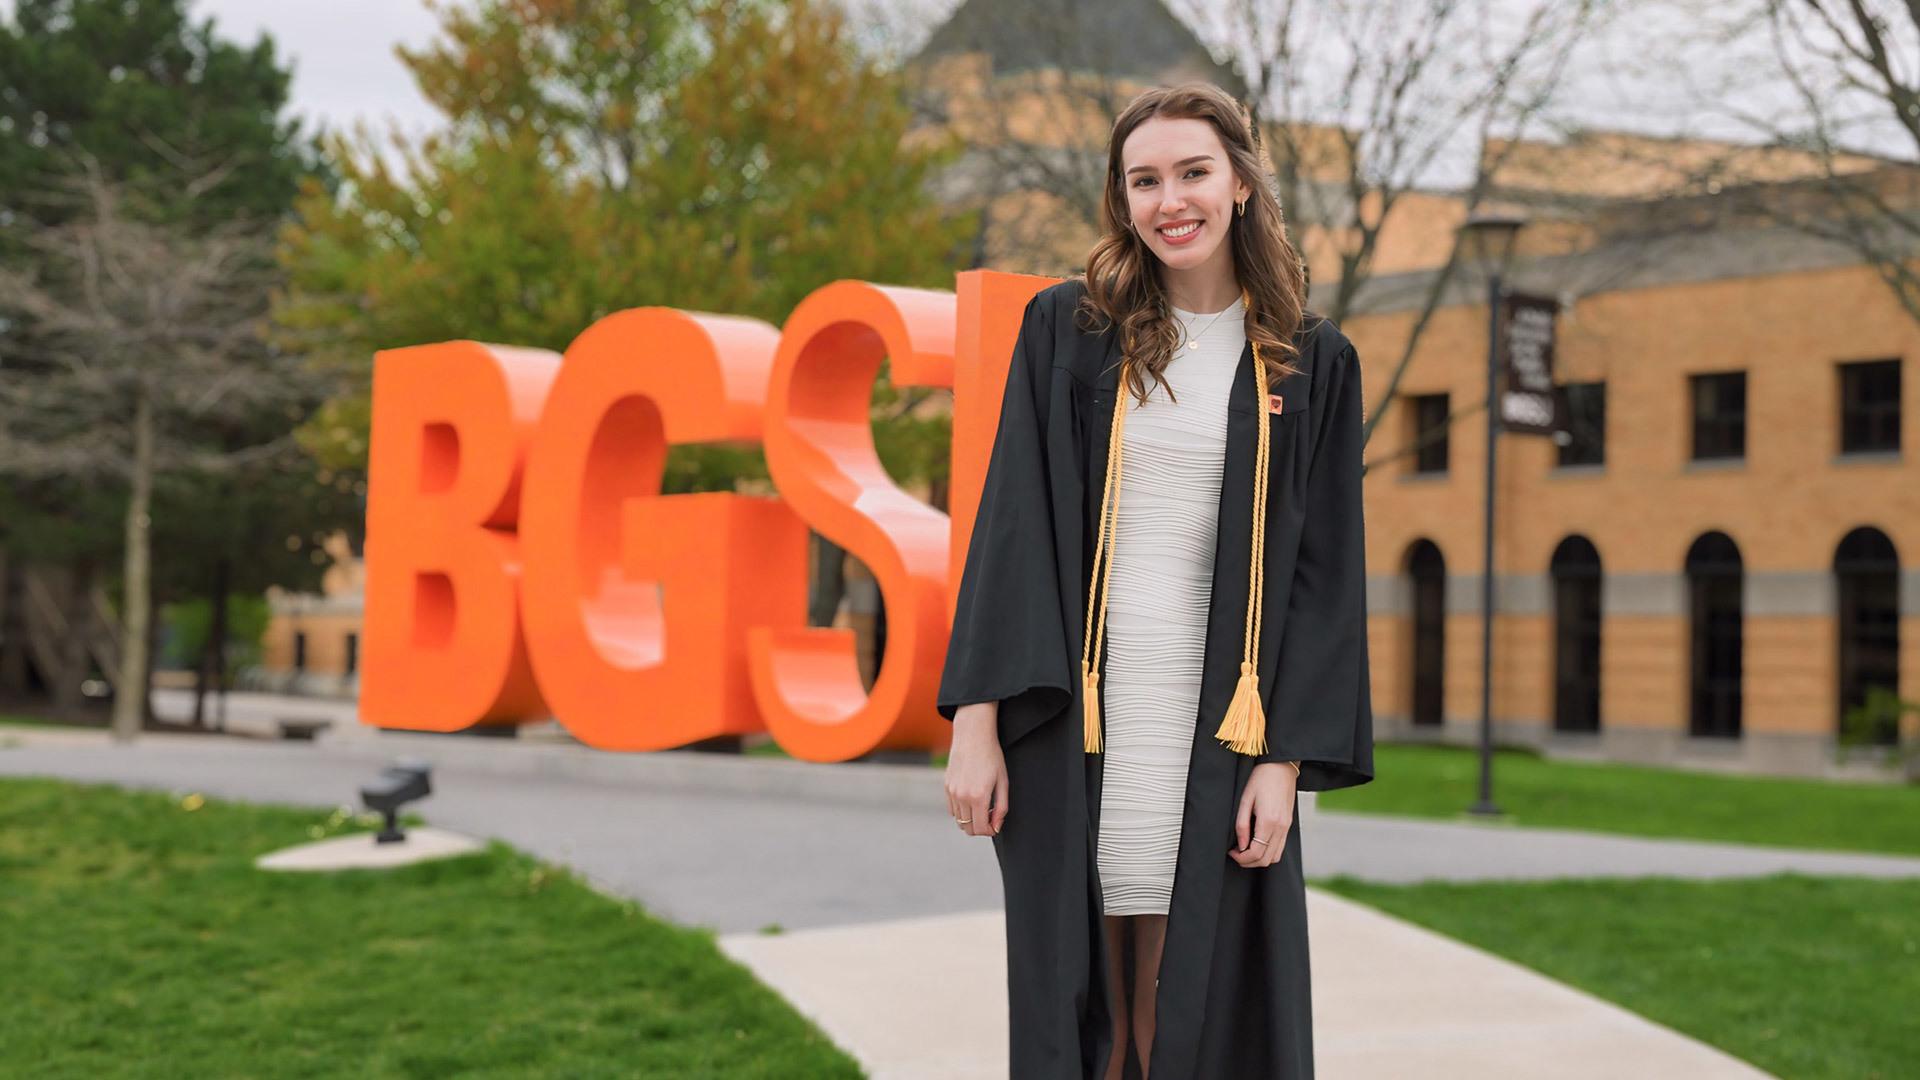 Image of student standing in front of BGSU letters in a graduation gown